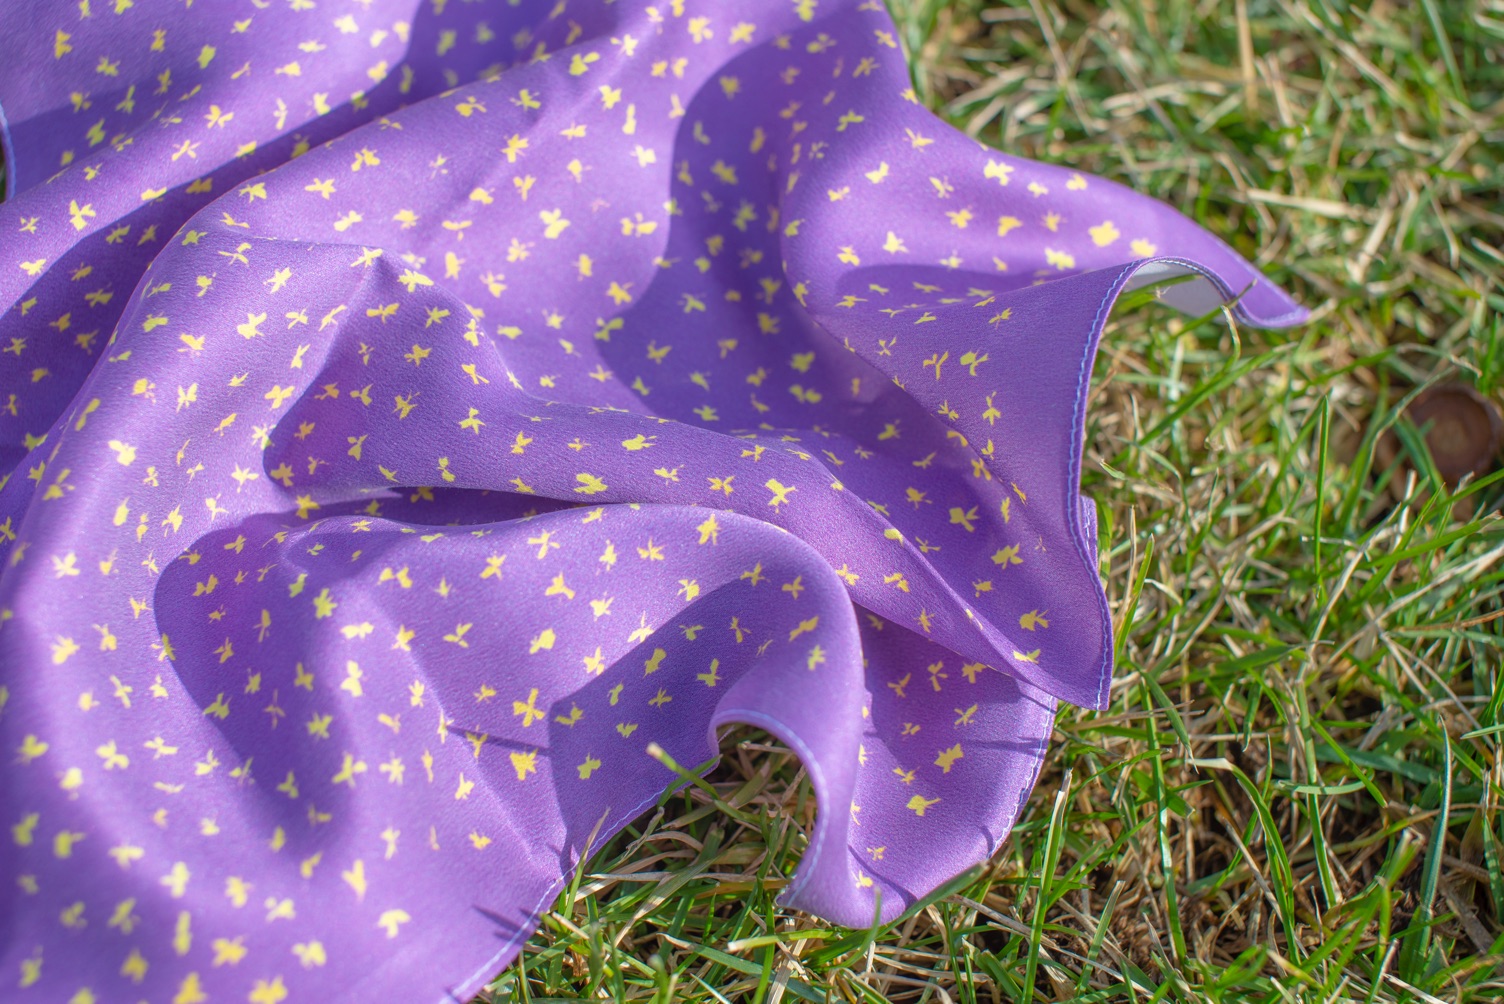 A silk handkerchief printed with a sprinkle of bright abstract flowers, generated from moments on my birthday, lays on the grass.